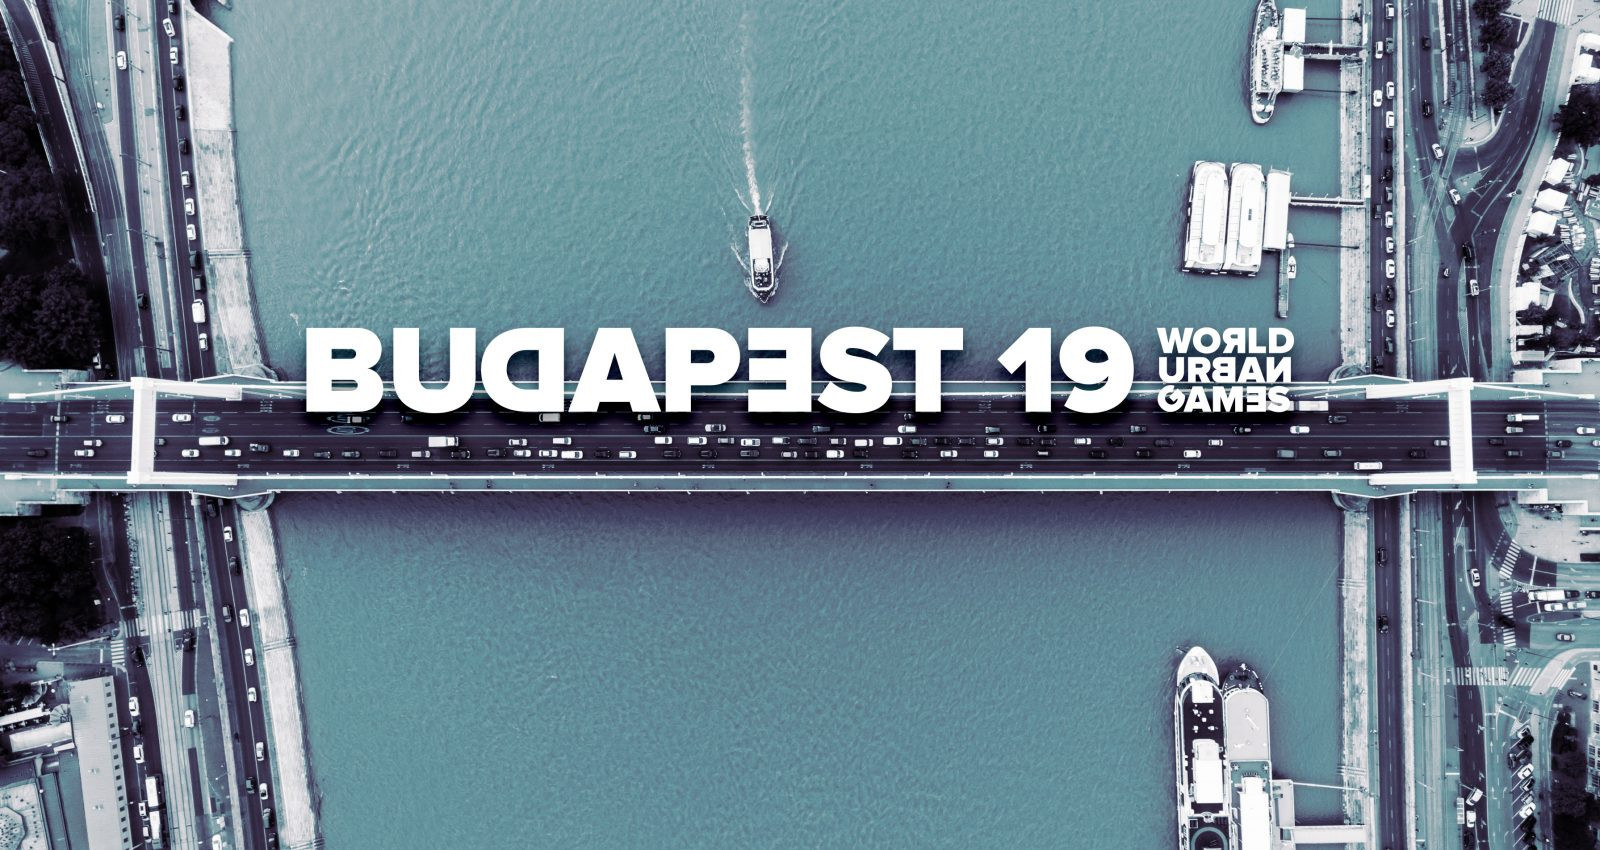 The World Urban Games is set to take place in Budapest from September 13 to 15 ©GAISF